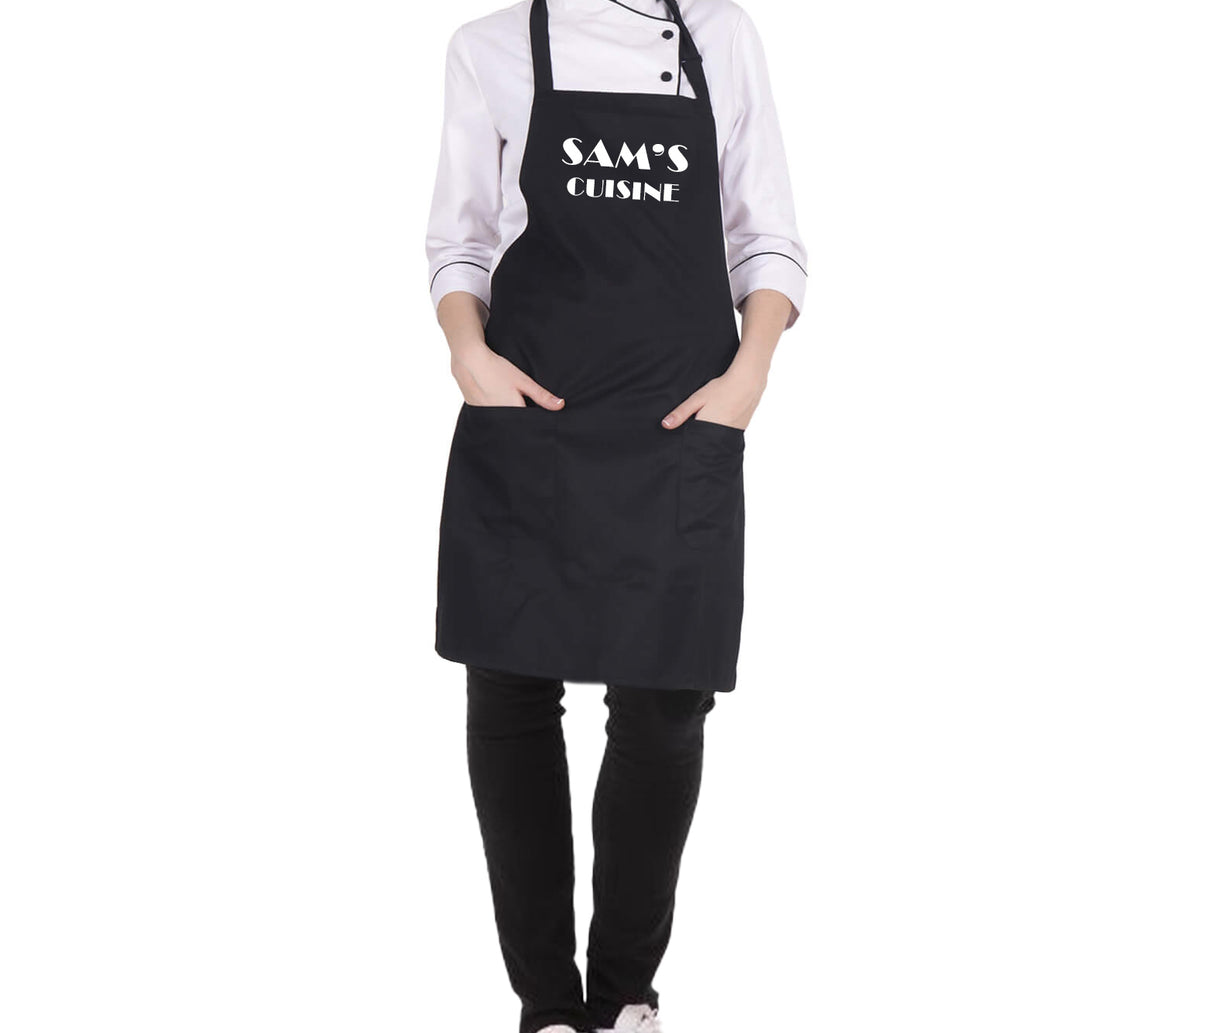 Bib Apron with adjustable neck strap and 3 pockets